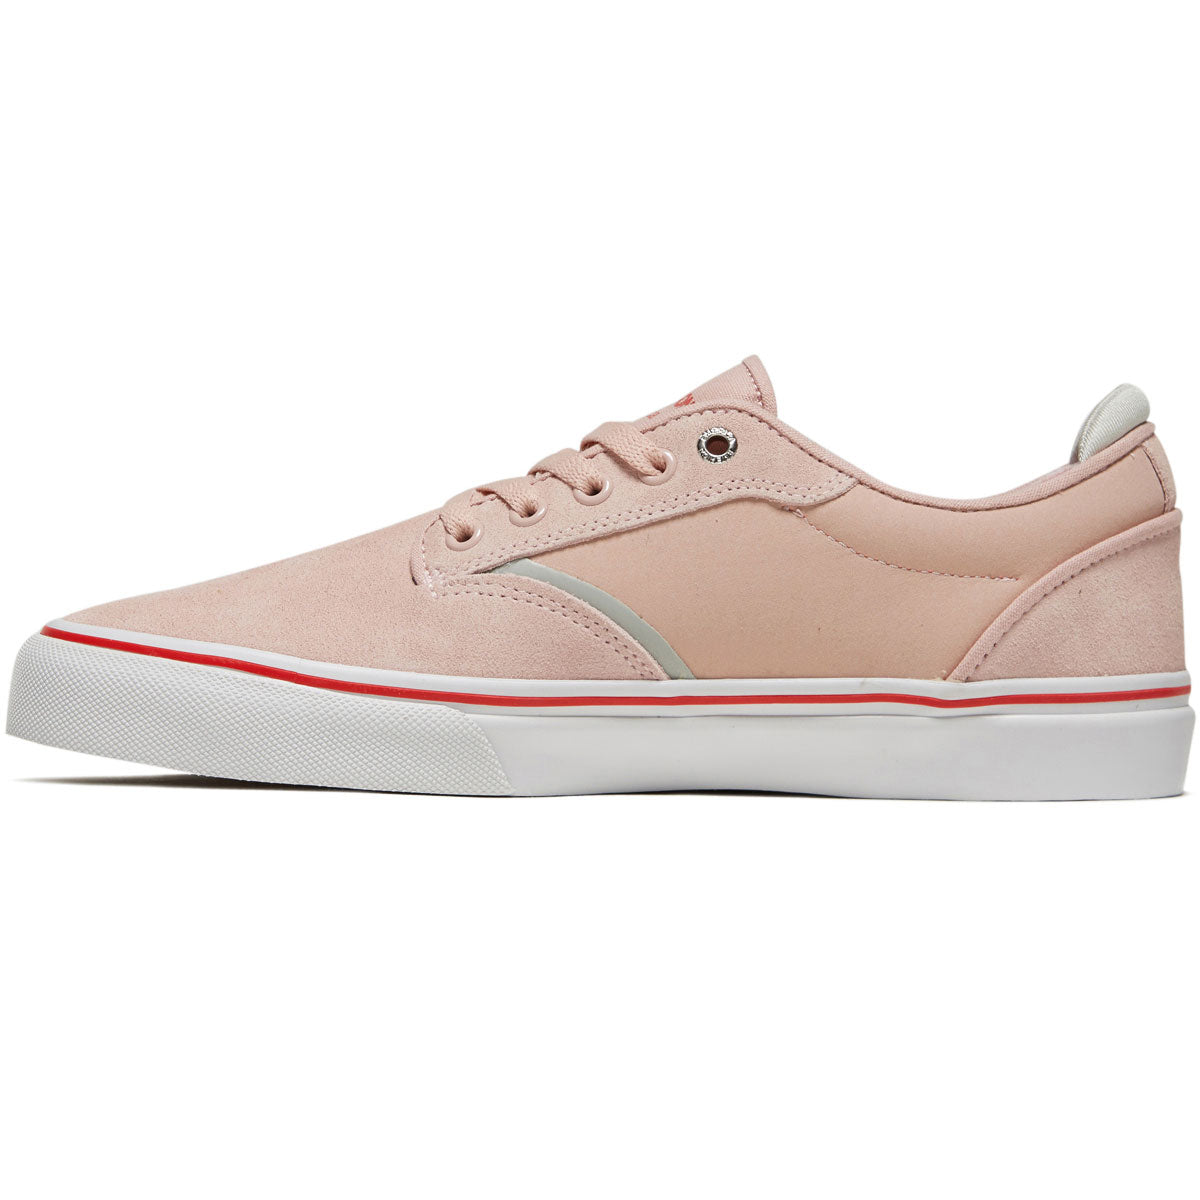 Emerica Dickson Shoes - Pink image 2